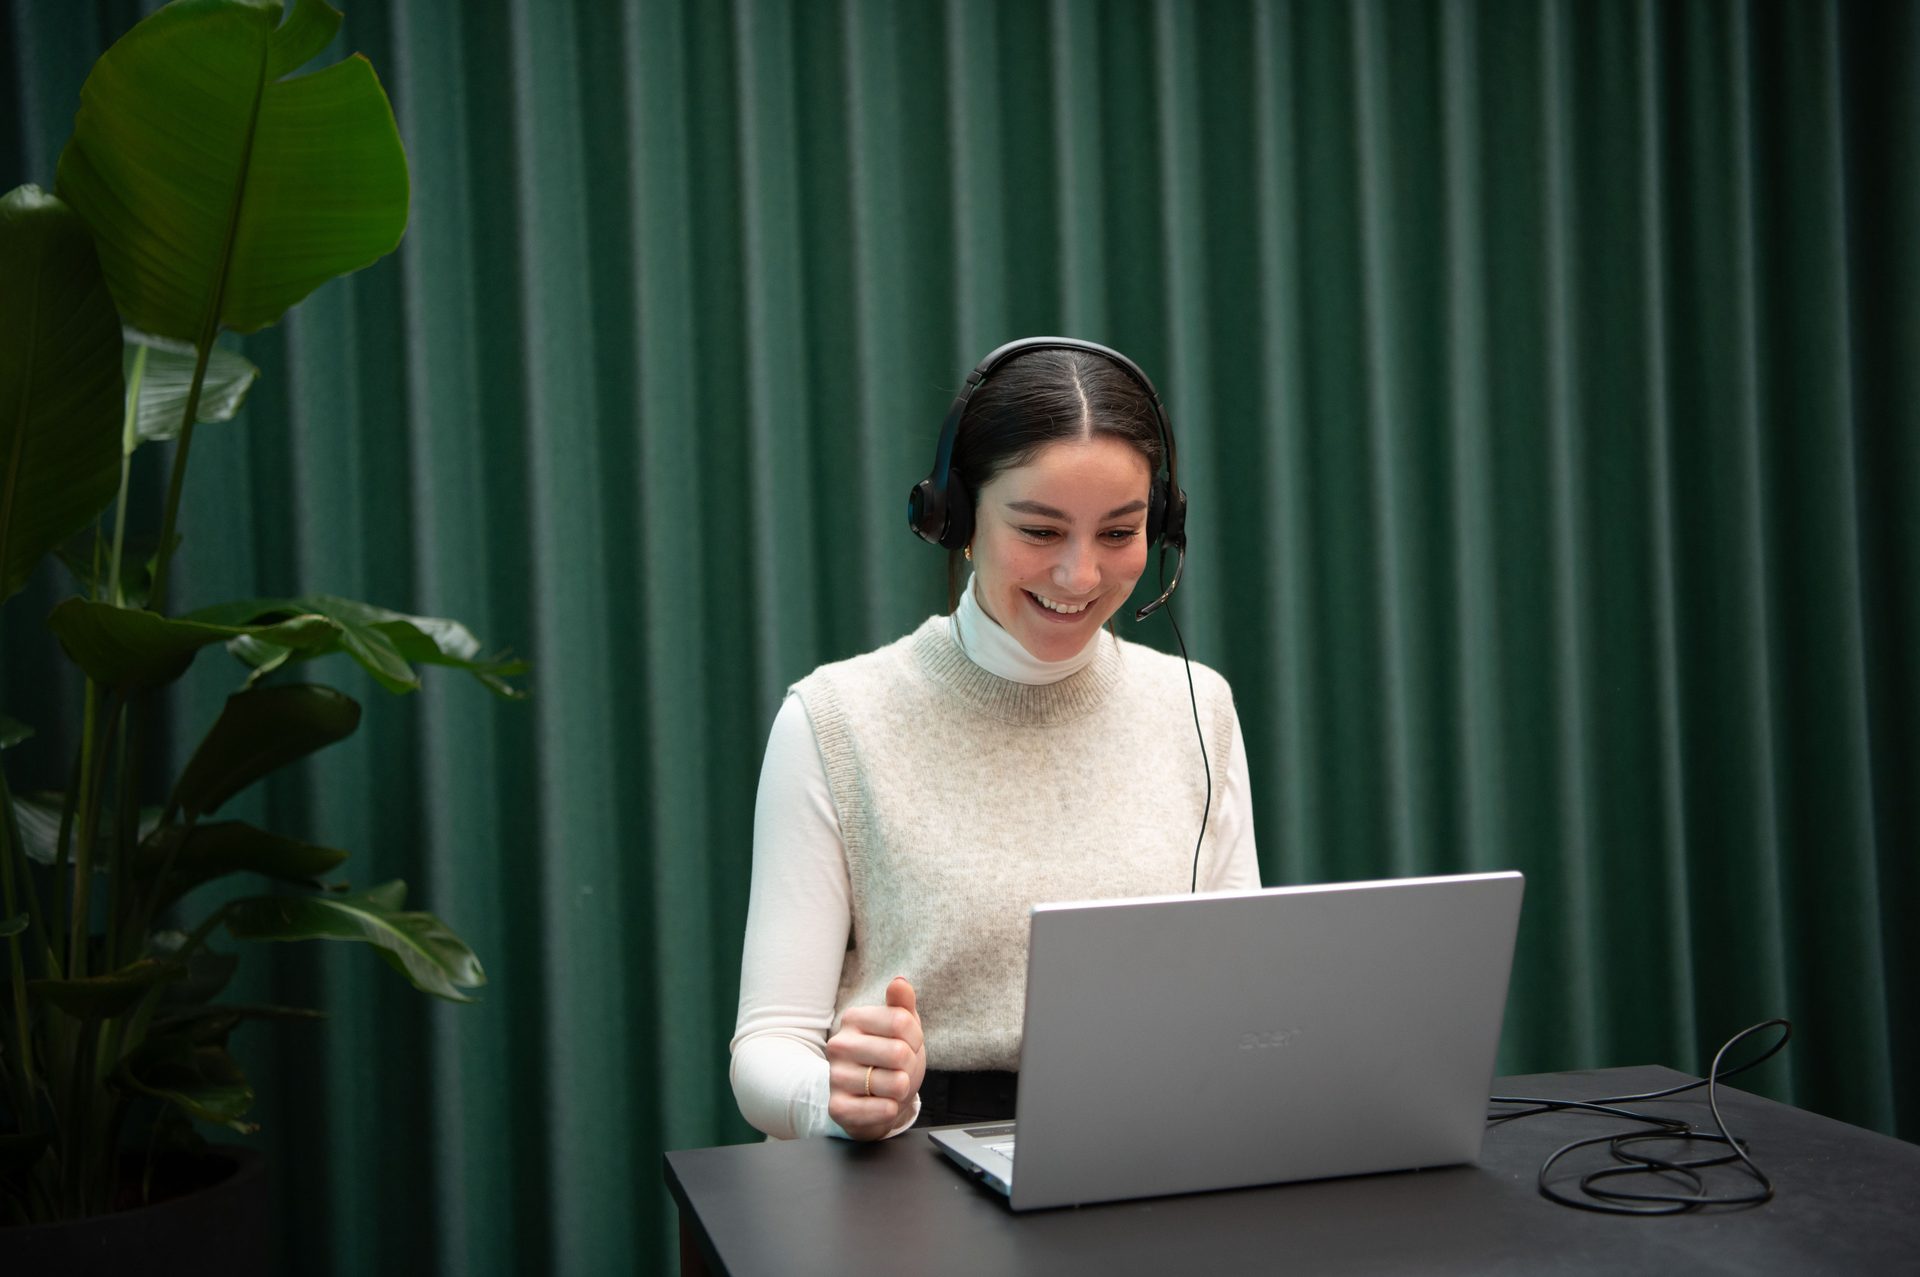 Smiling woman with a headset, sitting in front of a laptop. 